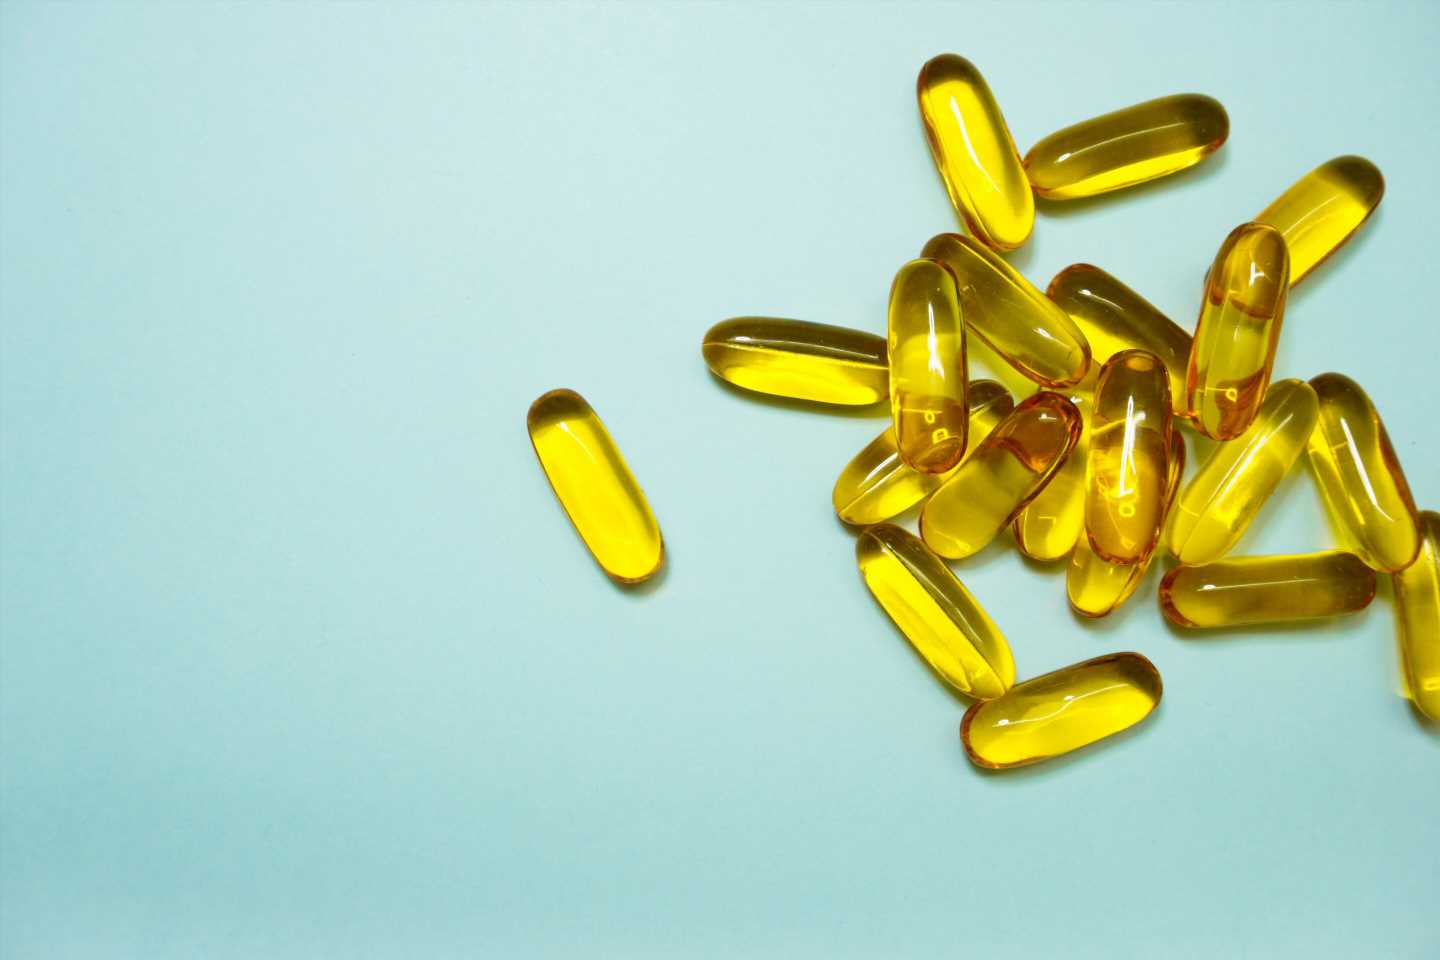 Vitamin D supplementation may lower diabetes risk for the more than 10 million adults with prediabetes